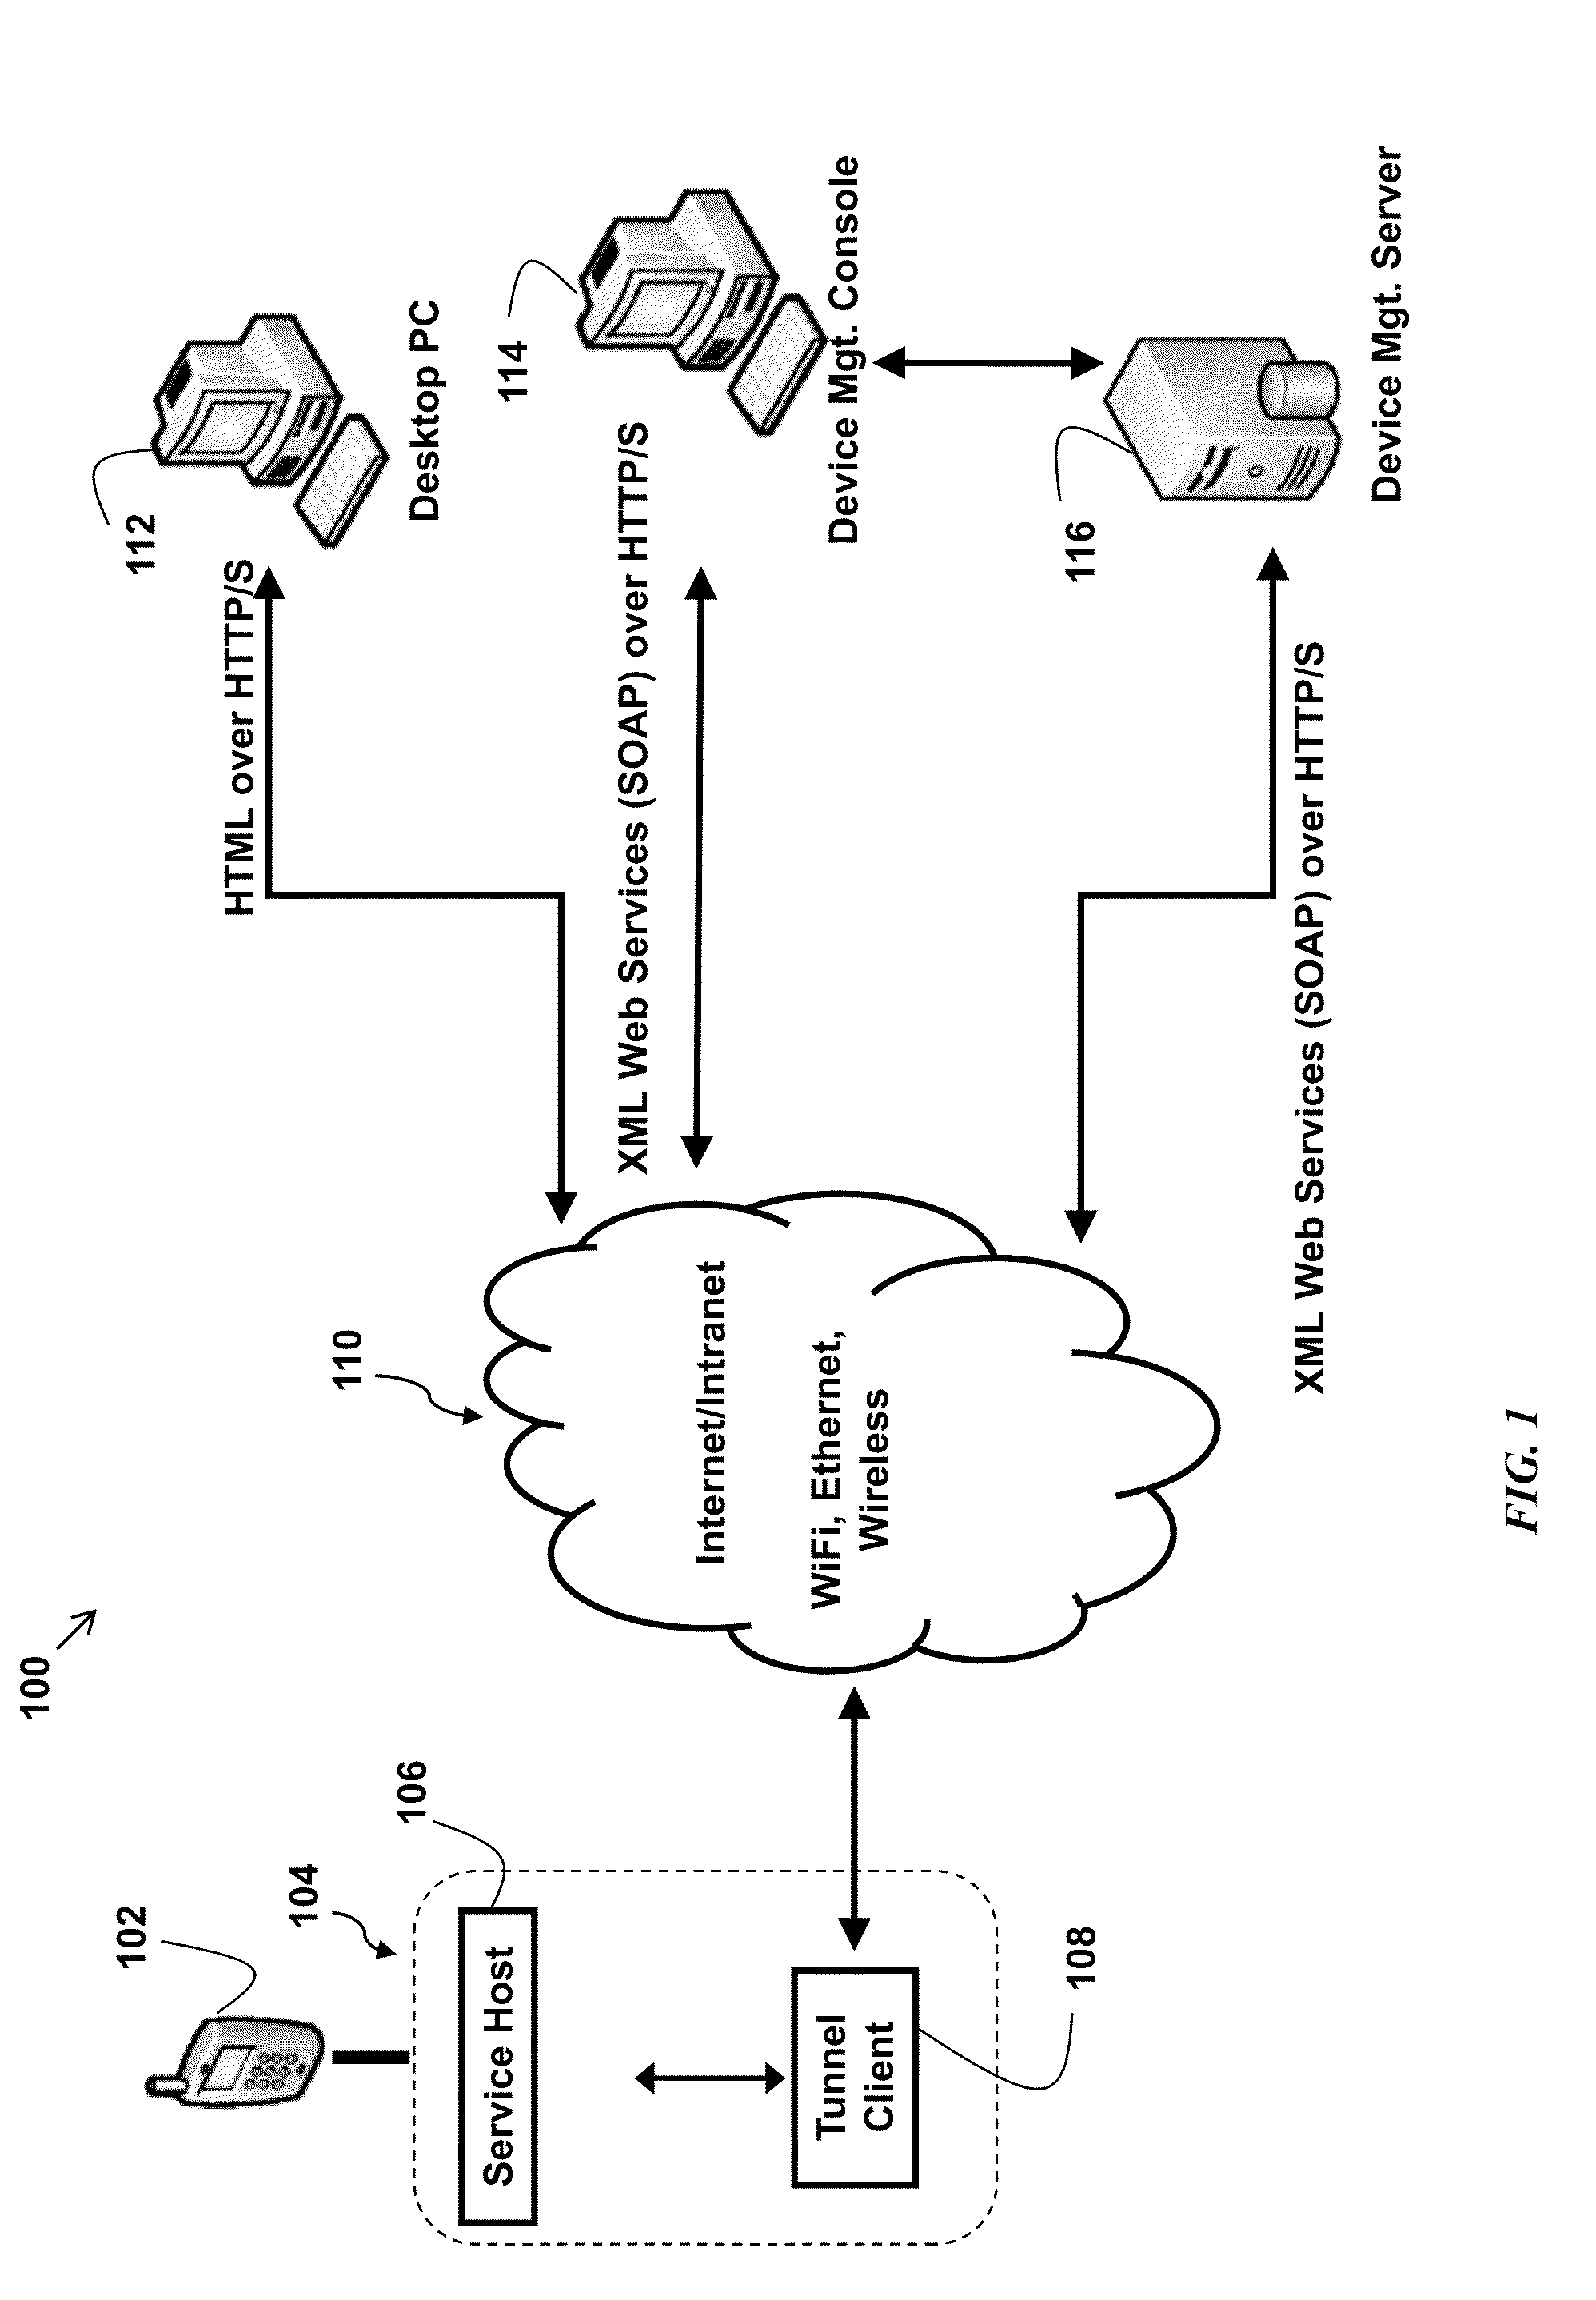 Method, system, and computer readable medium for remote assistance, support, and troubleshooting